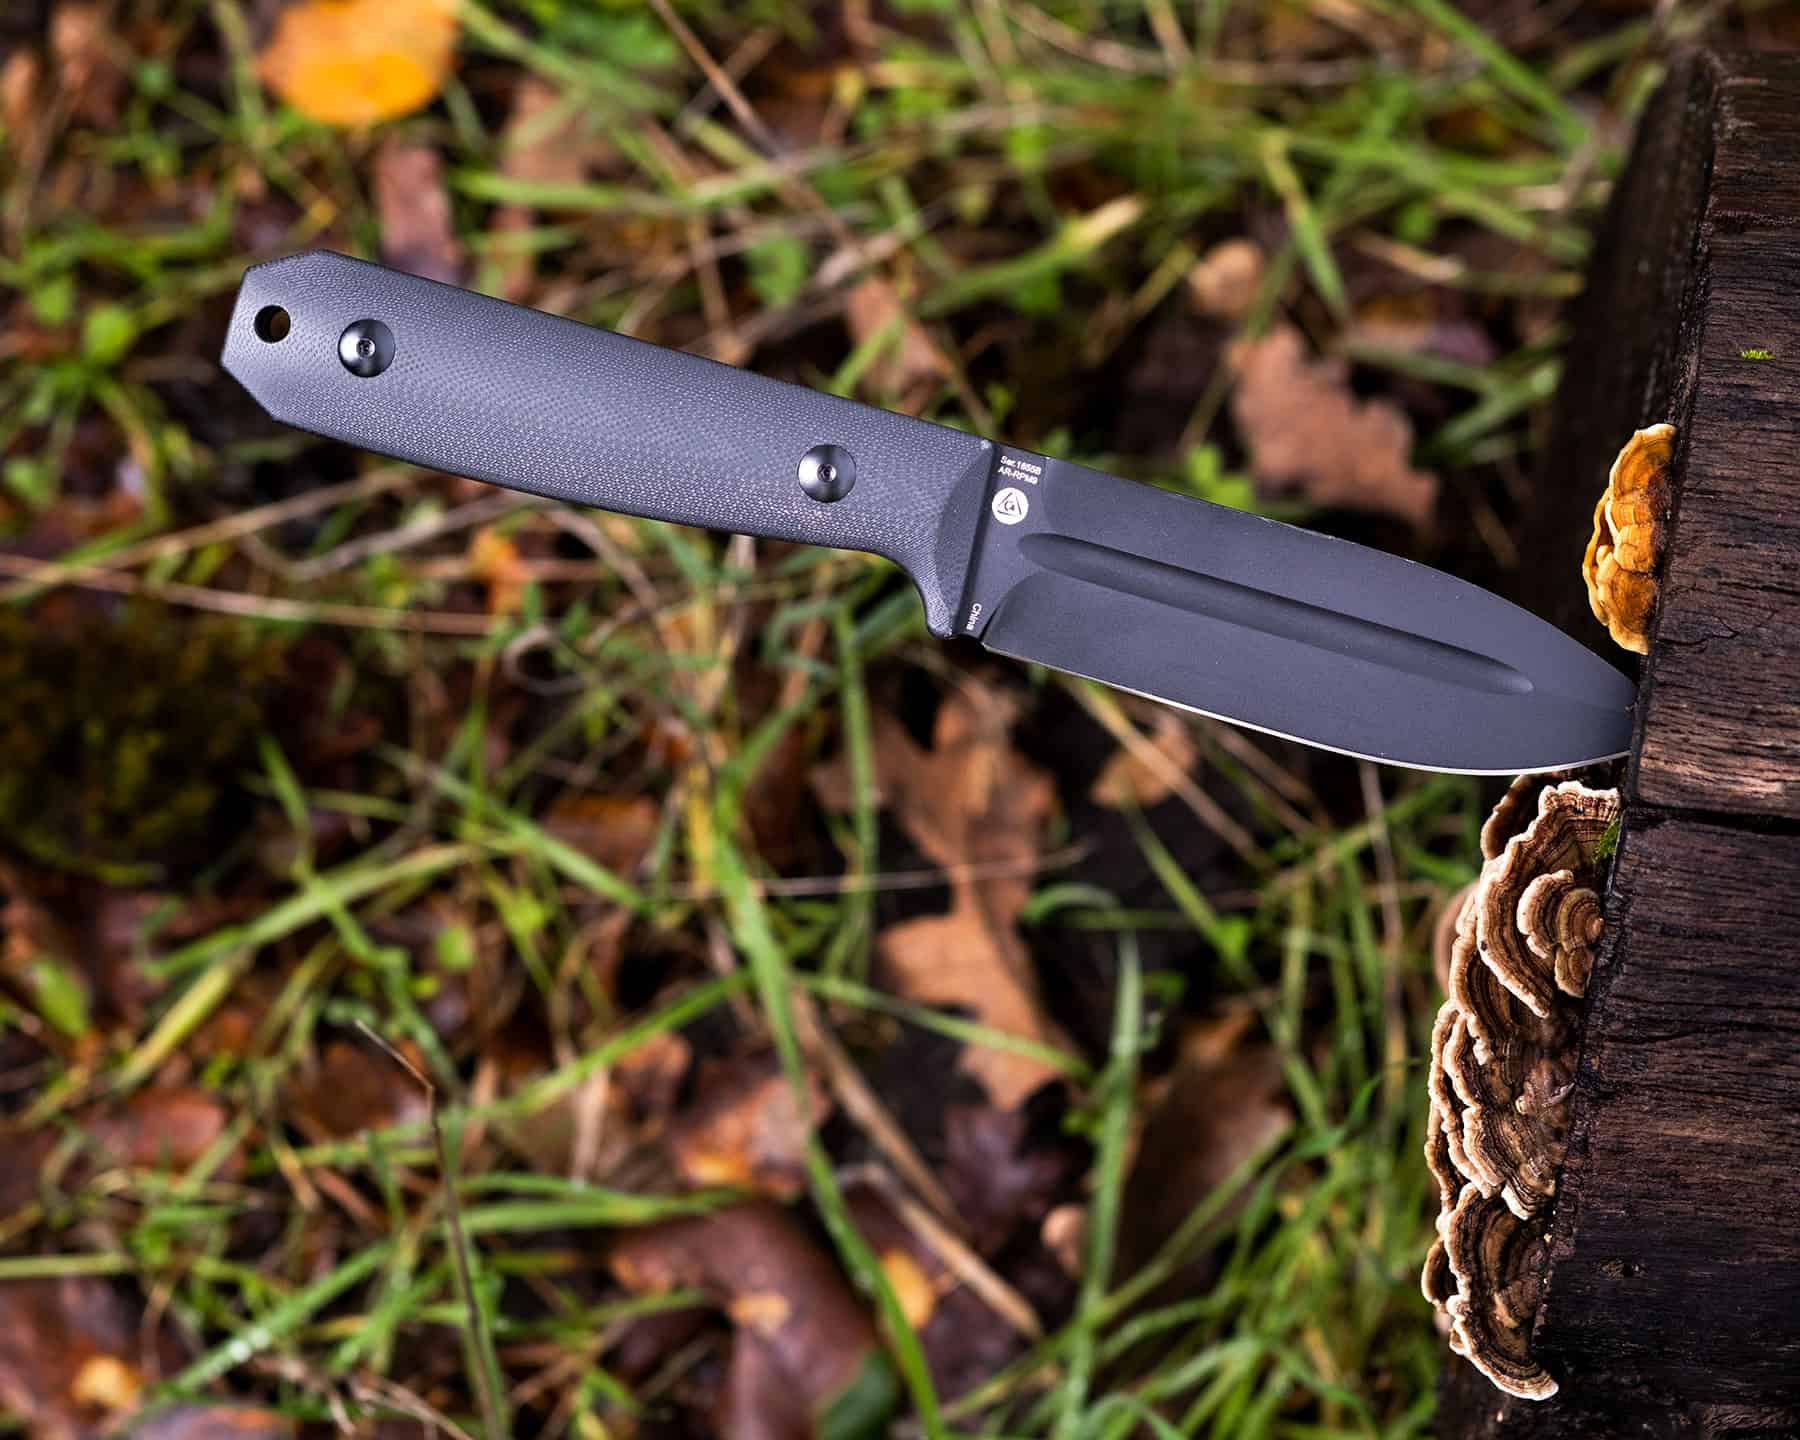 The AR-RPM9 steel blade of the Wreckhart is a great budget steel. 